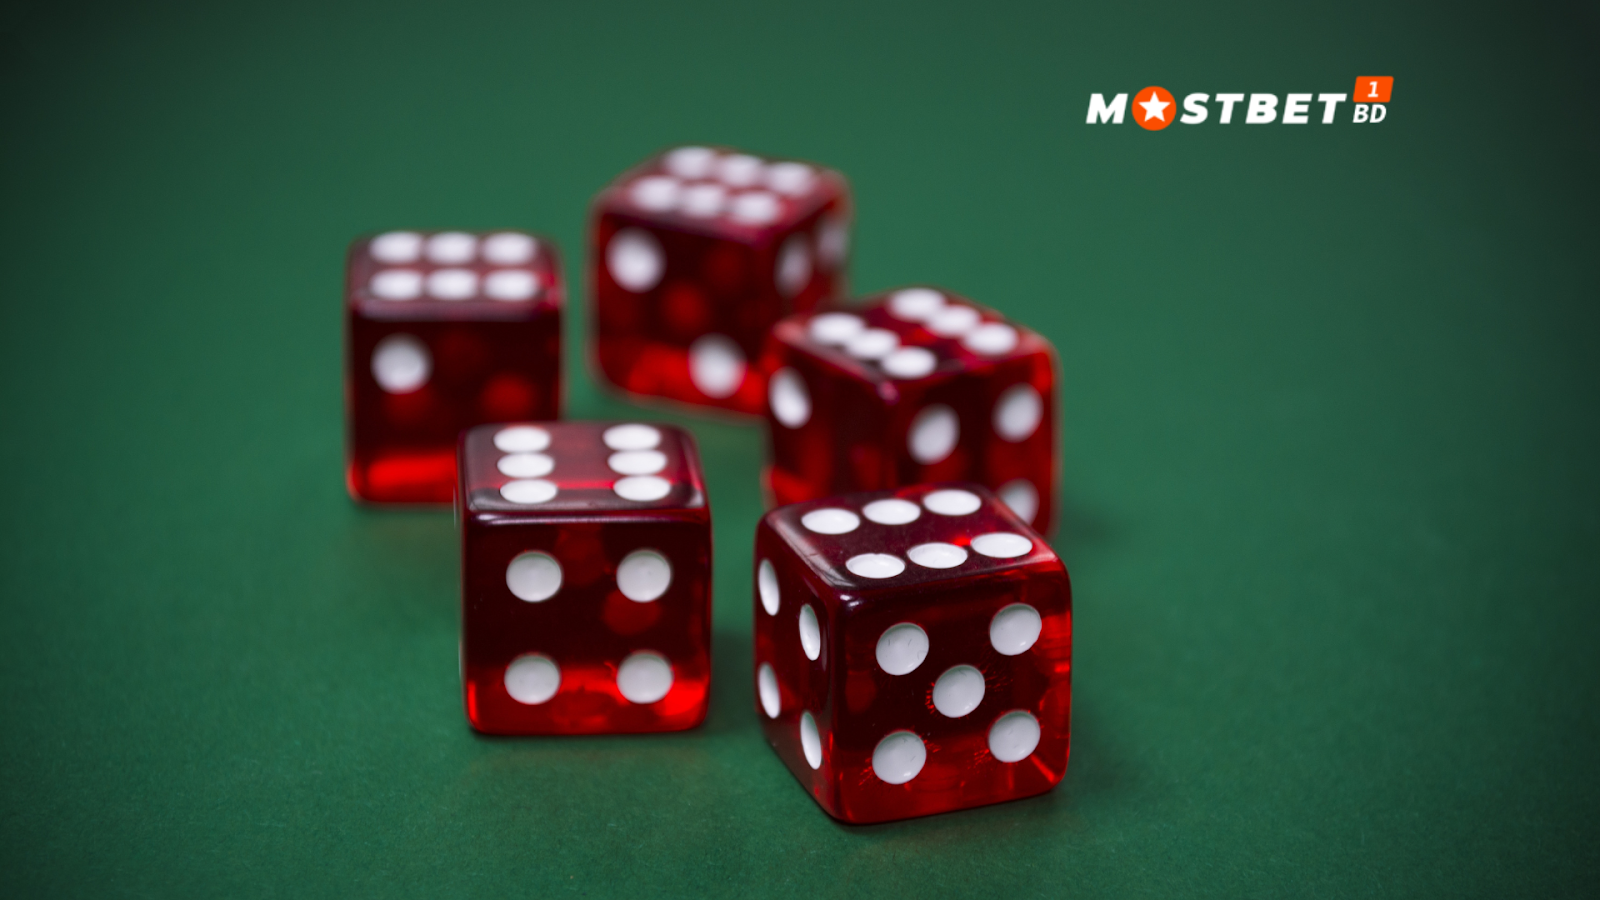 Discover Online Gambling with MostBet